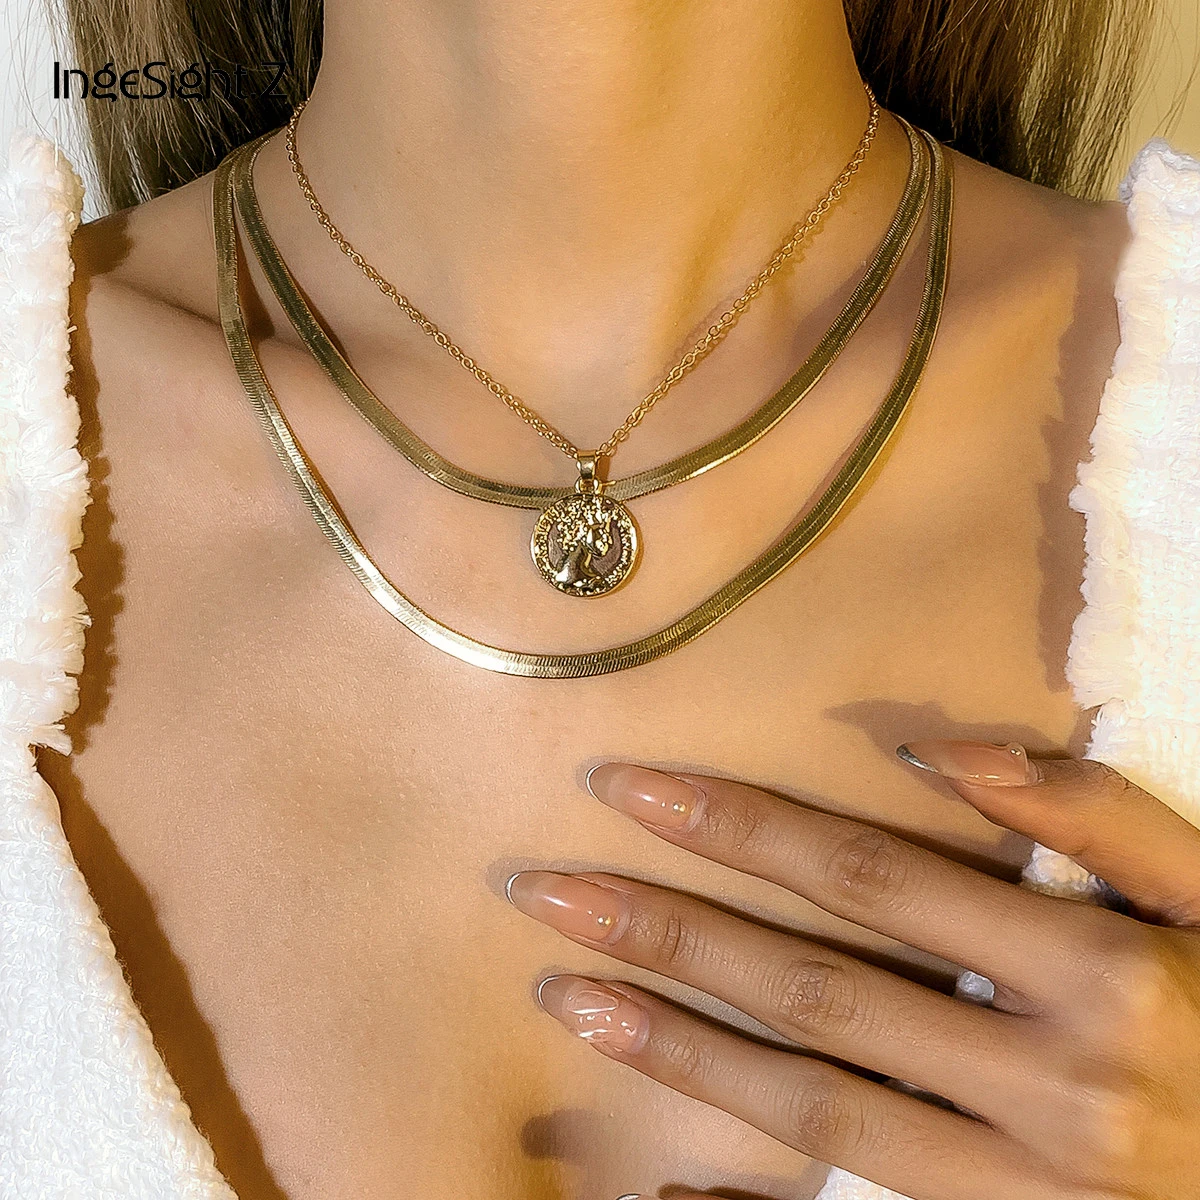 

IngeSight.Z Copper Flat Snake Chain Choker Necklace Multi Layered Carved Coin Pendant Necklaces for Women Statement New Jewelry